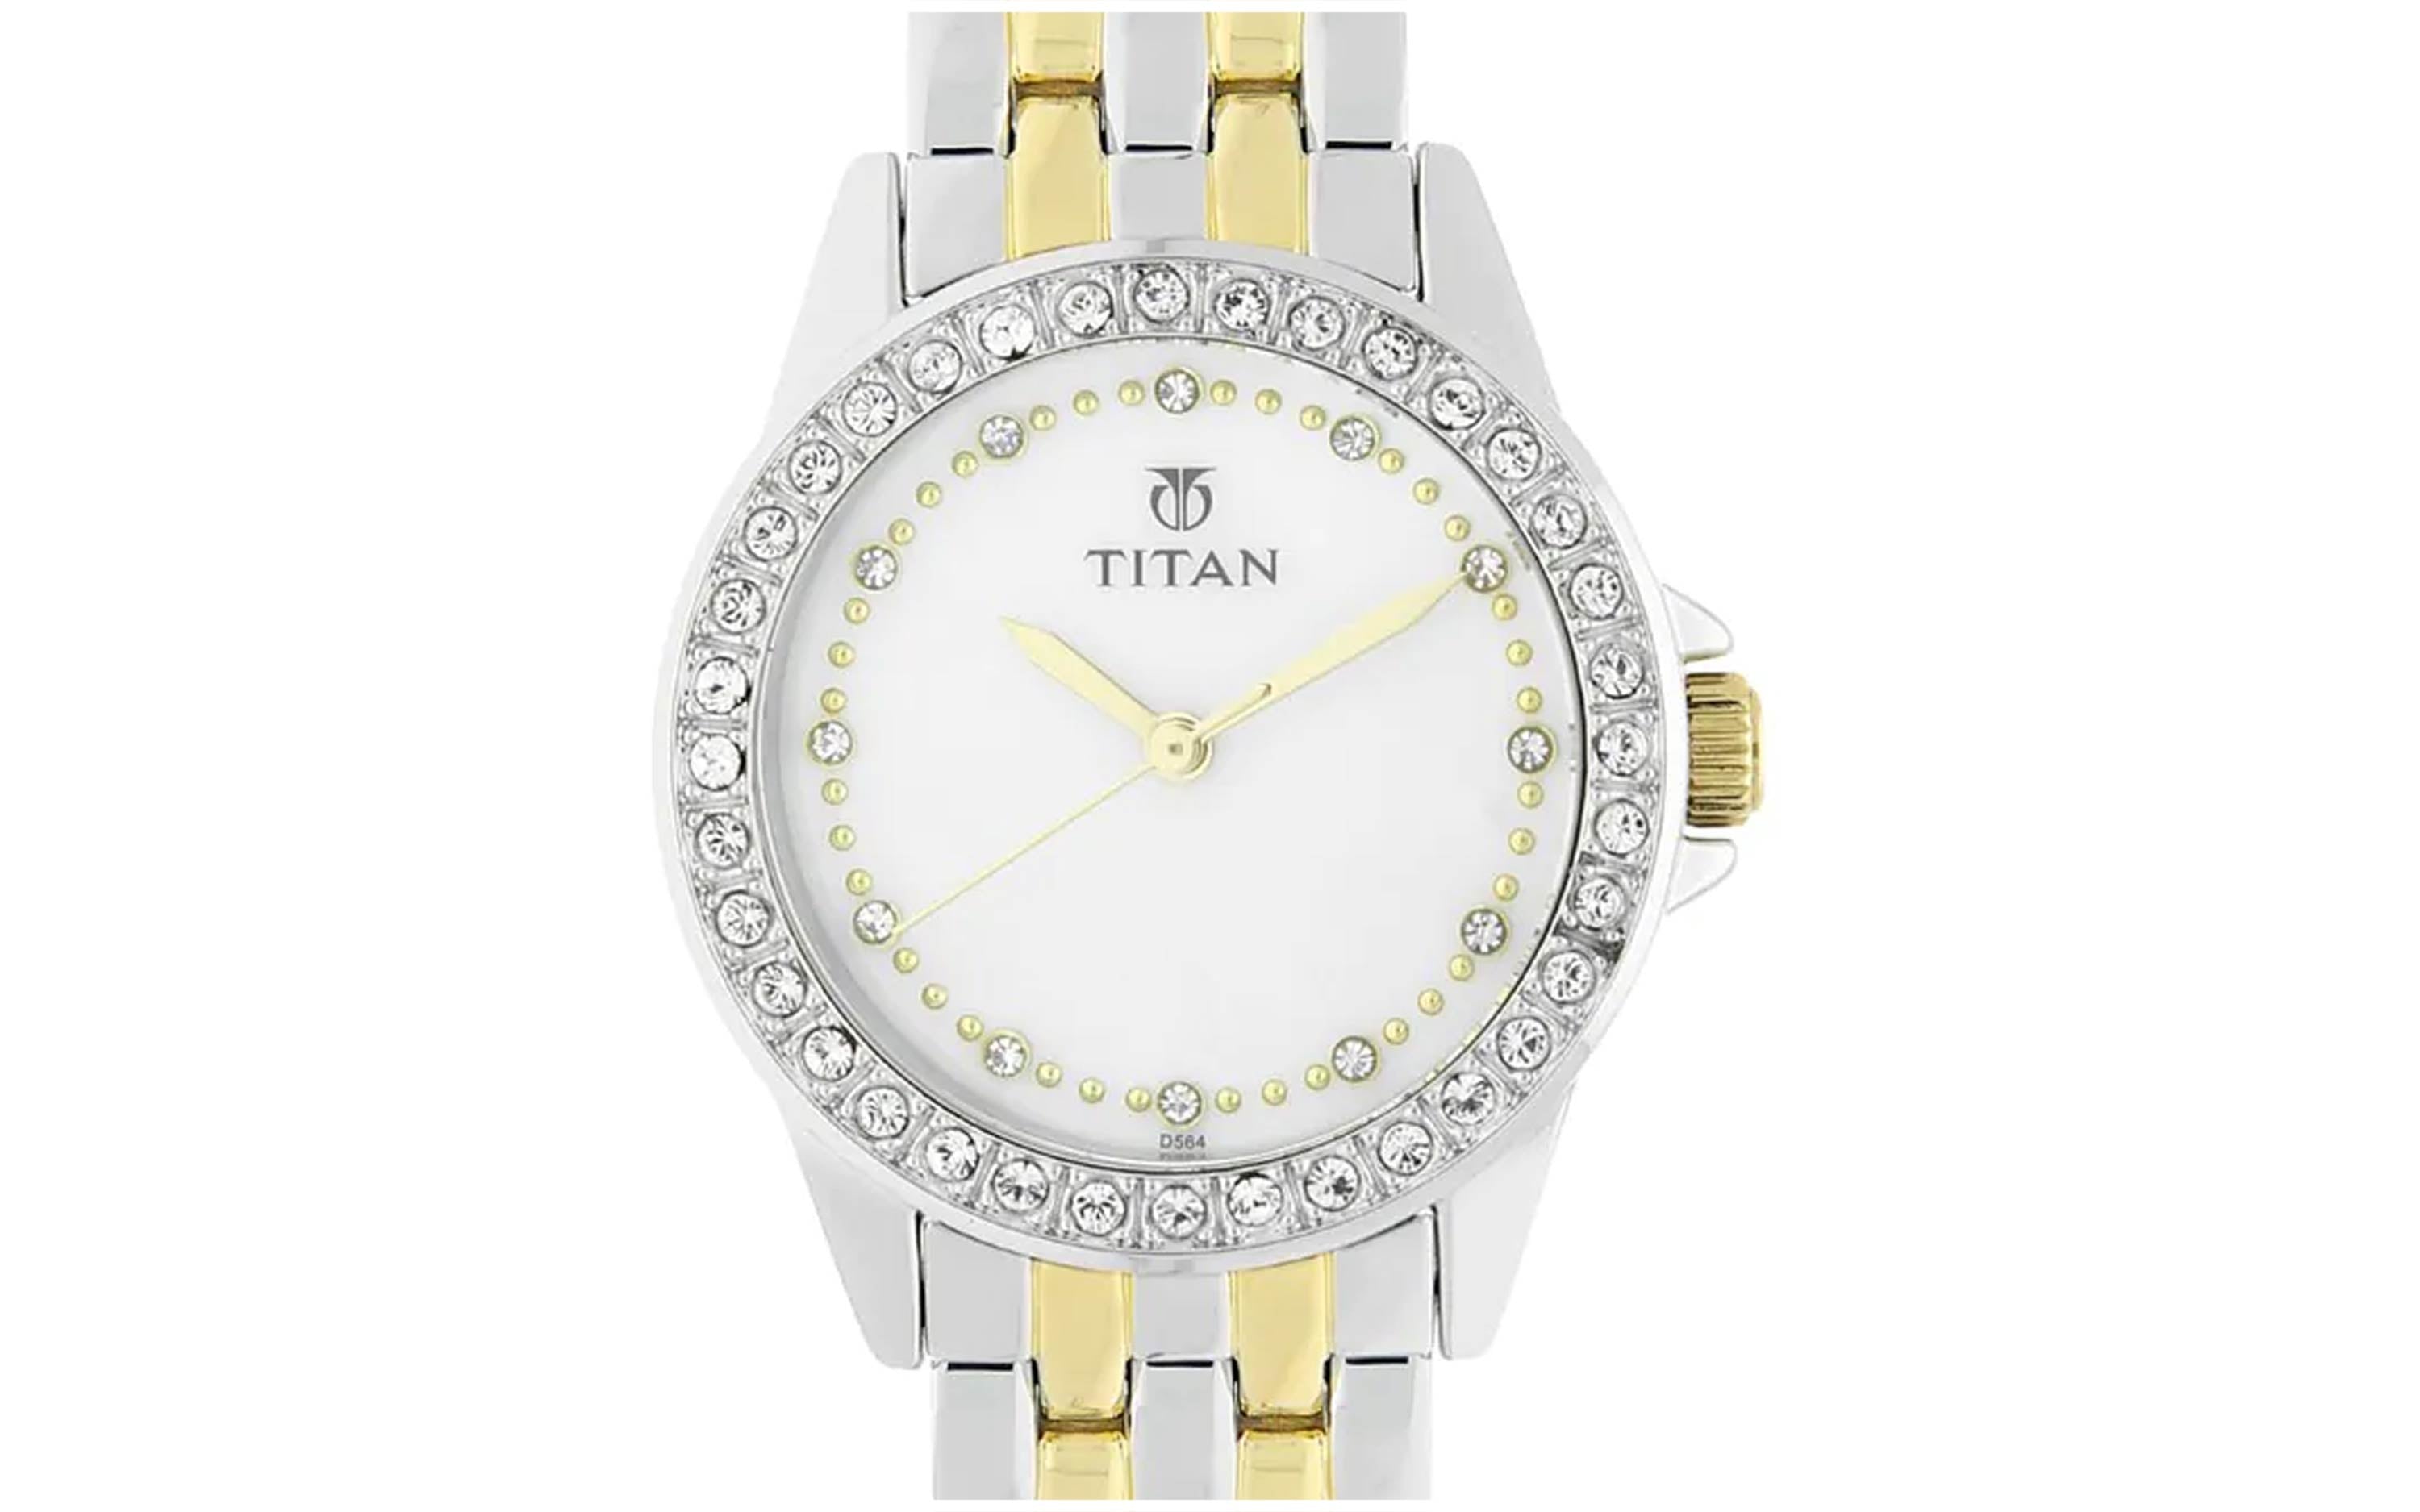 Buy Titan White Dial Silver Band Analog Stainless Steel Watch For Women  -NR2536BM02 at Amazon.in